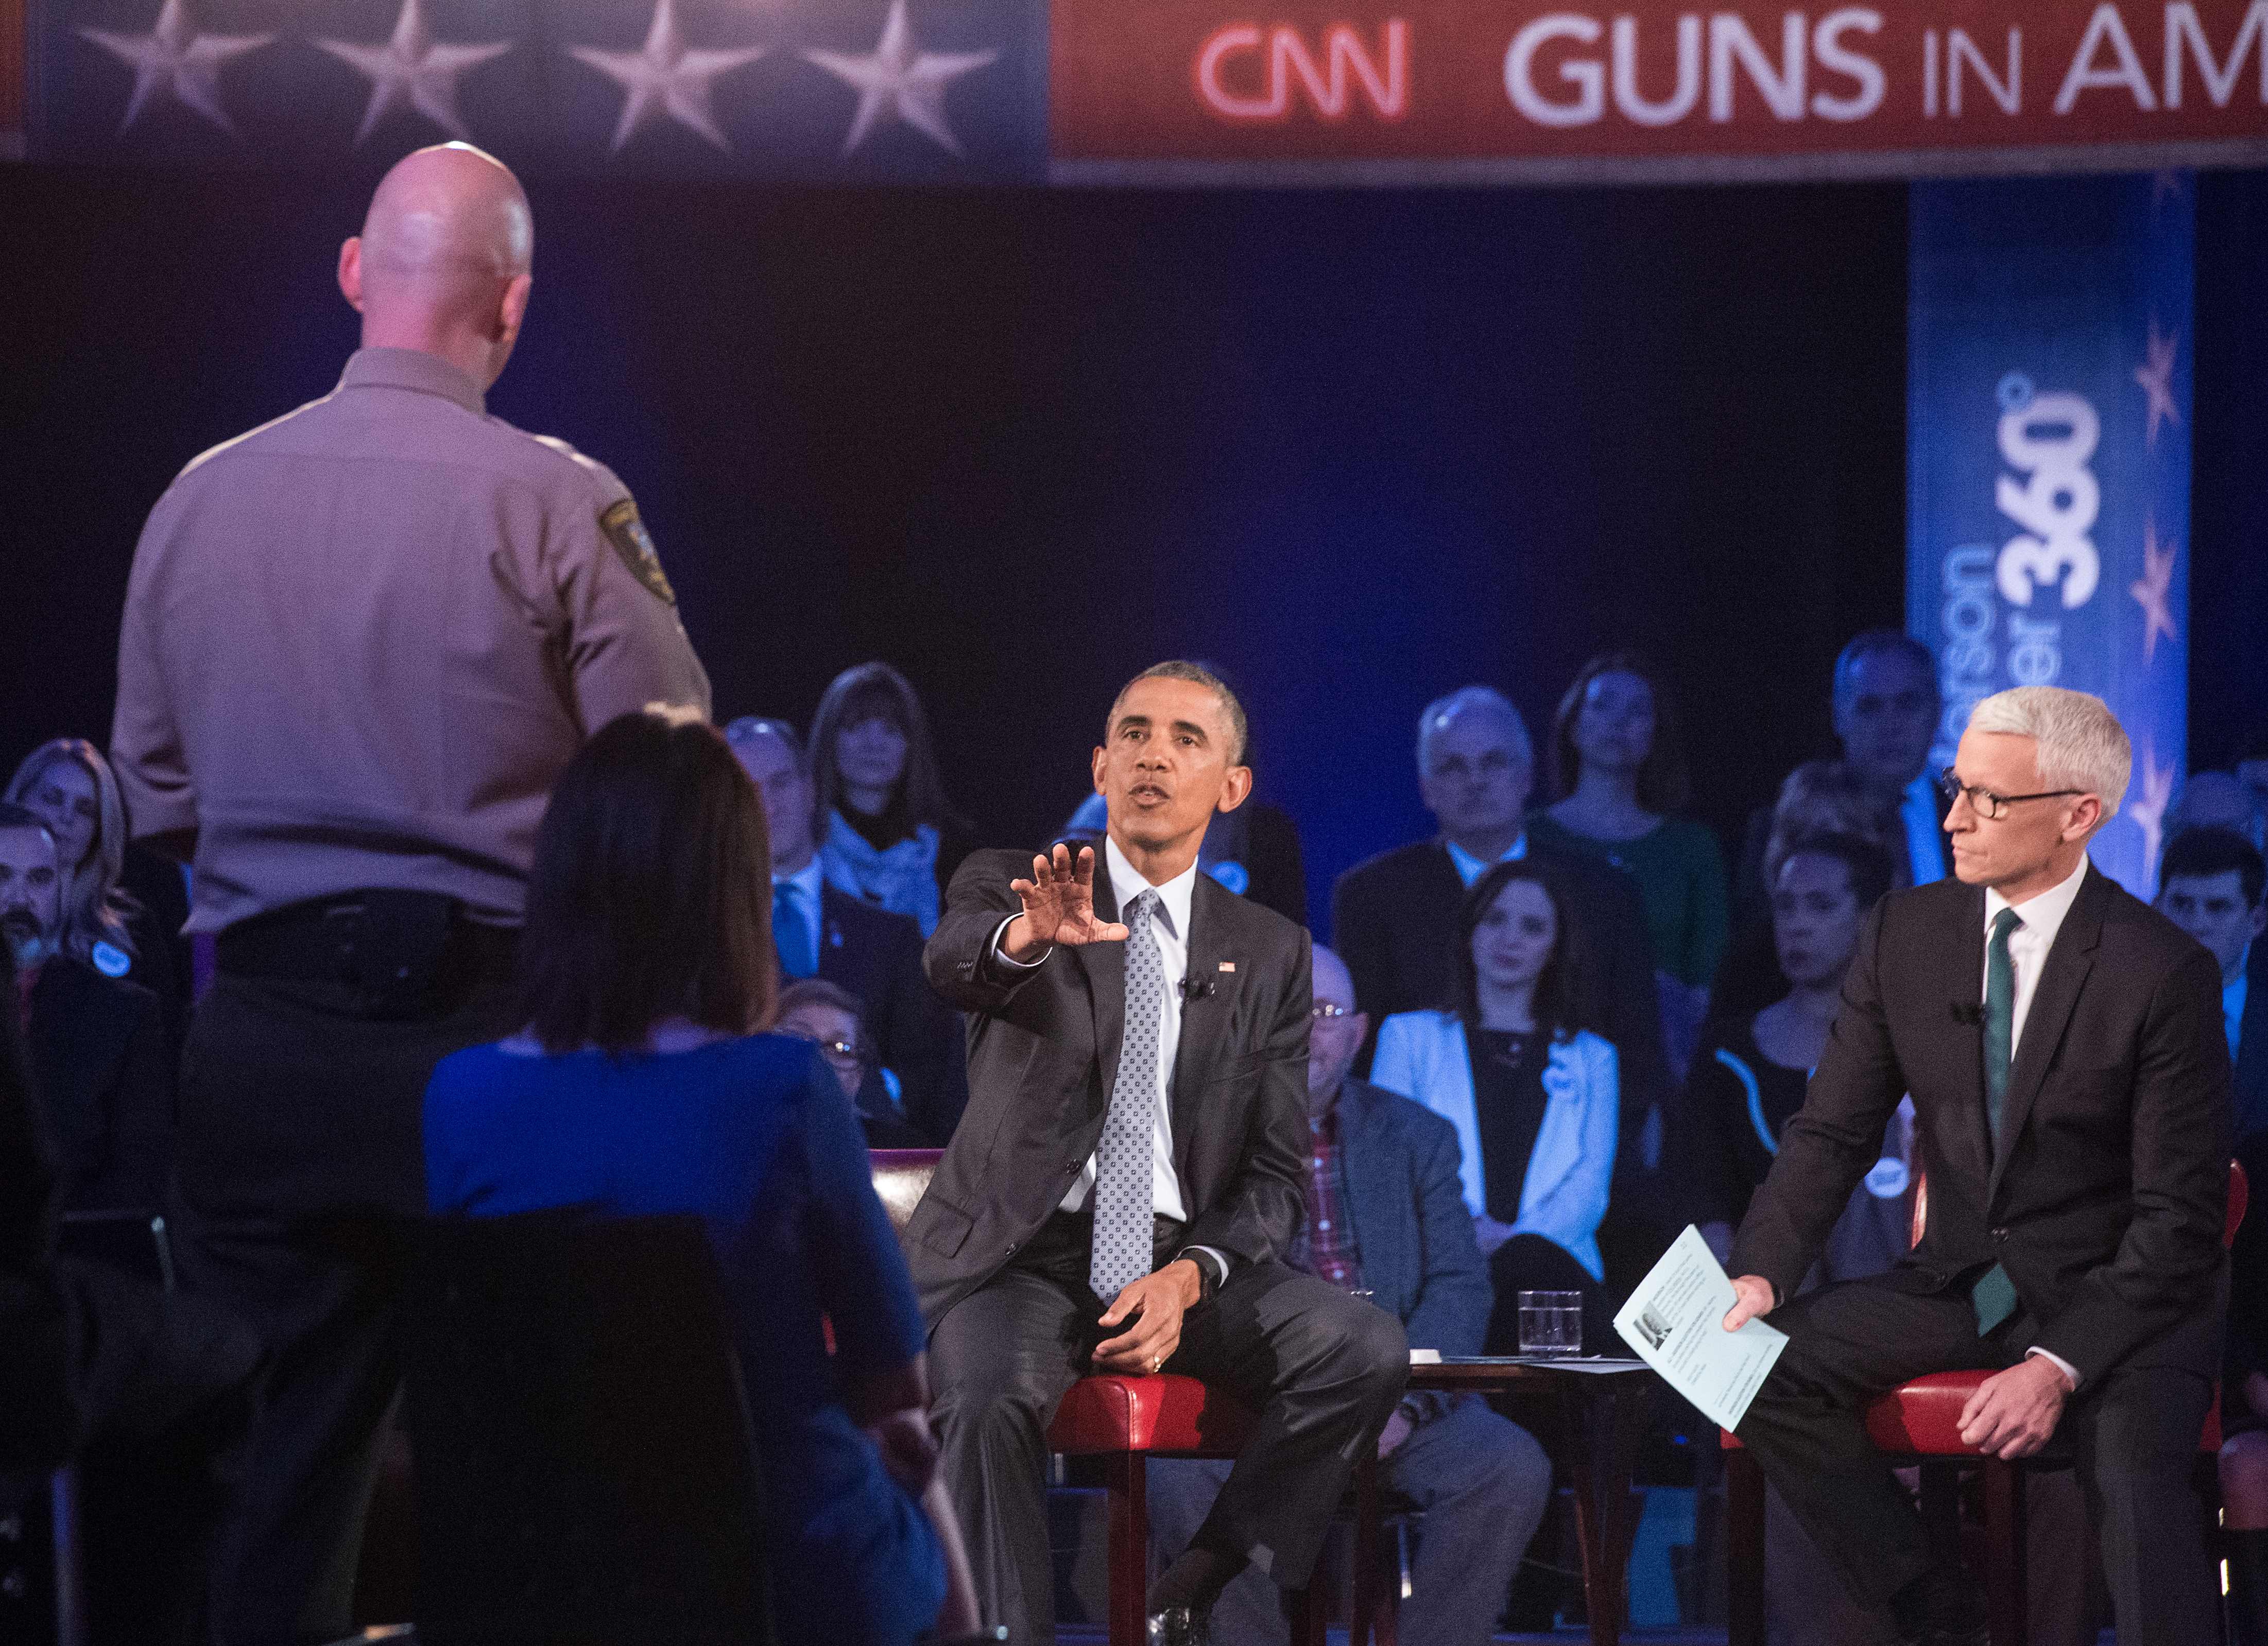 President Barack Obama replies to a question by Arizona Sheriff Paul Babeu (L) at a town hall meeting with CNN's Anderson Cooper (R) on reducing gun violence at George Mason University in Fairfax, Virginia, on January 7, 2016. (NICHOLAS KAMM/AFP/Getty Images)